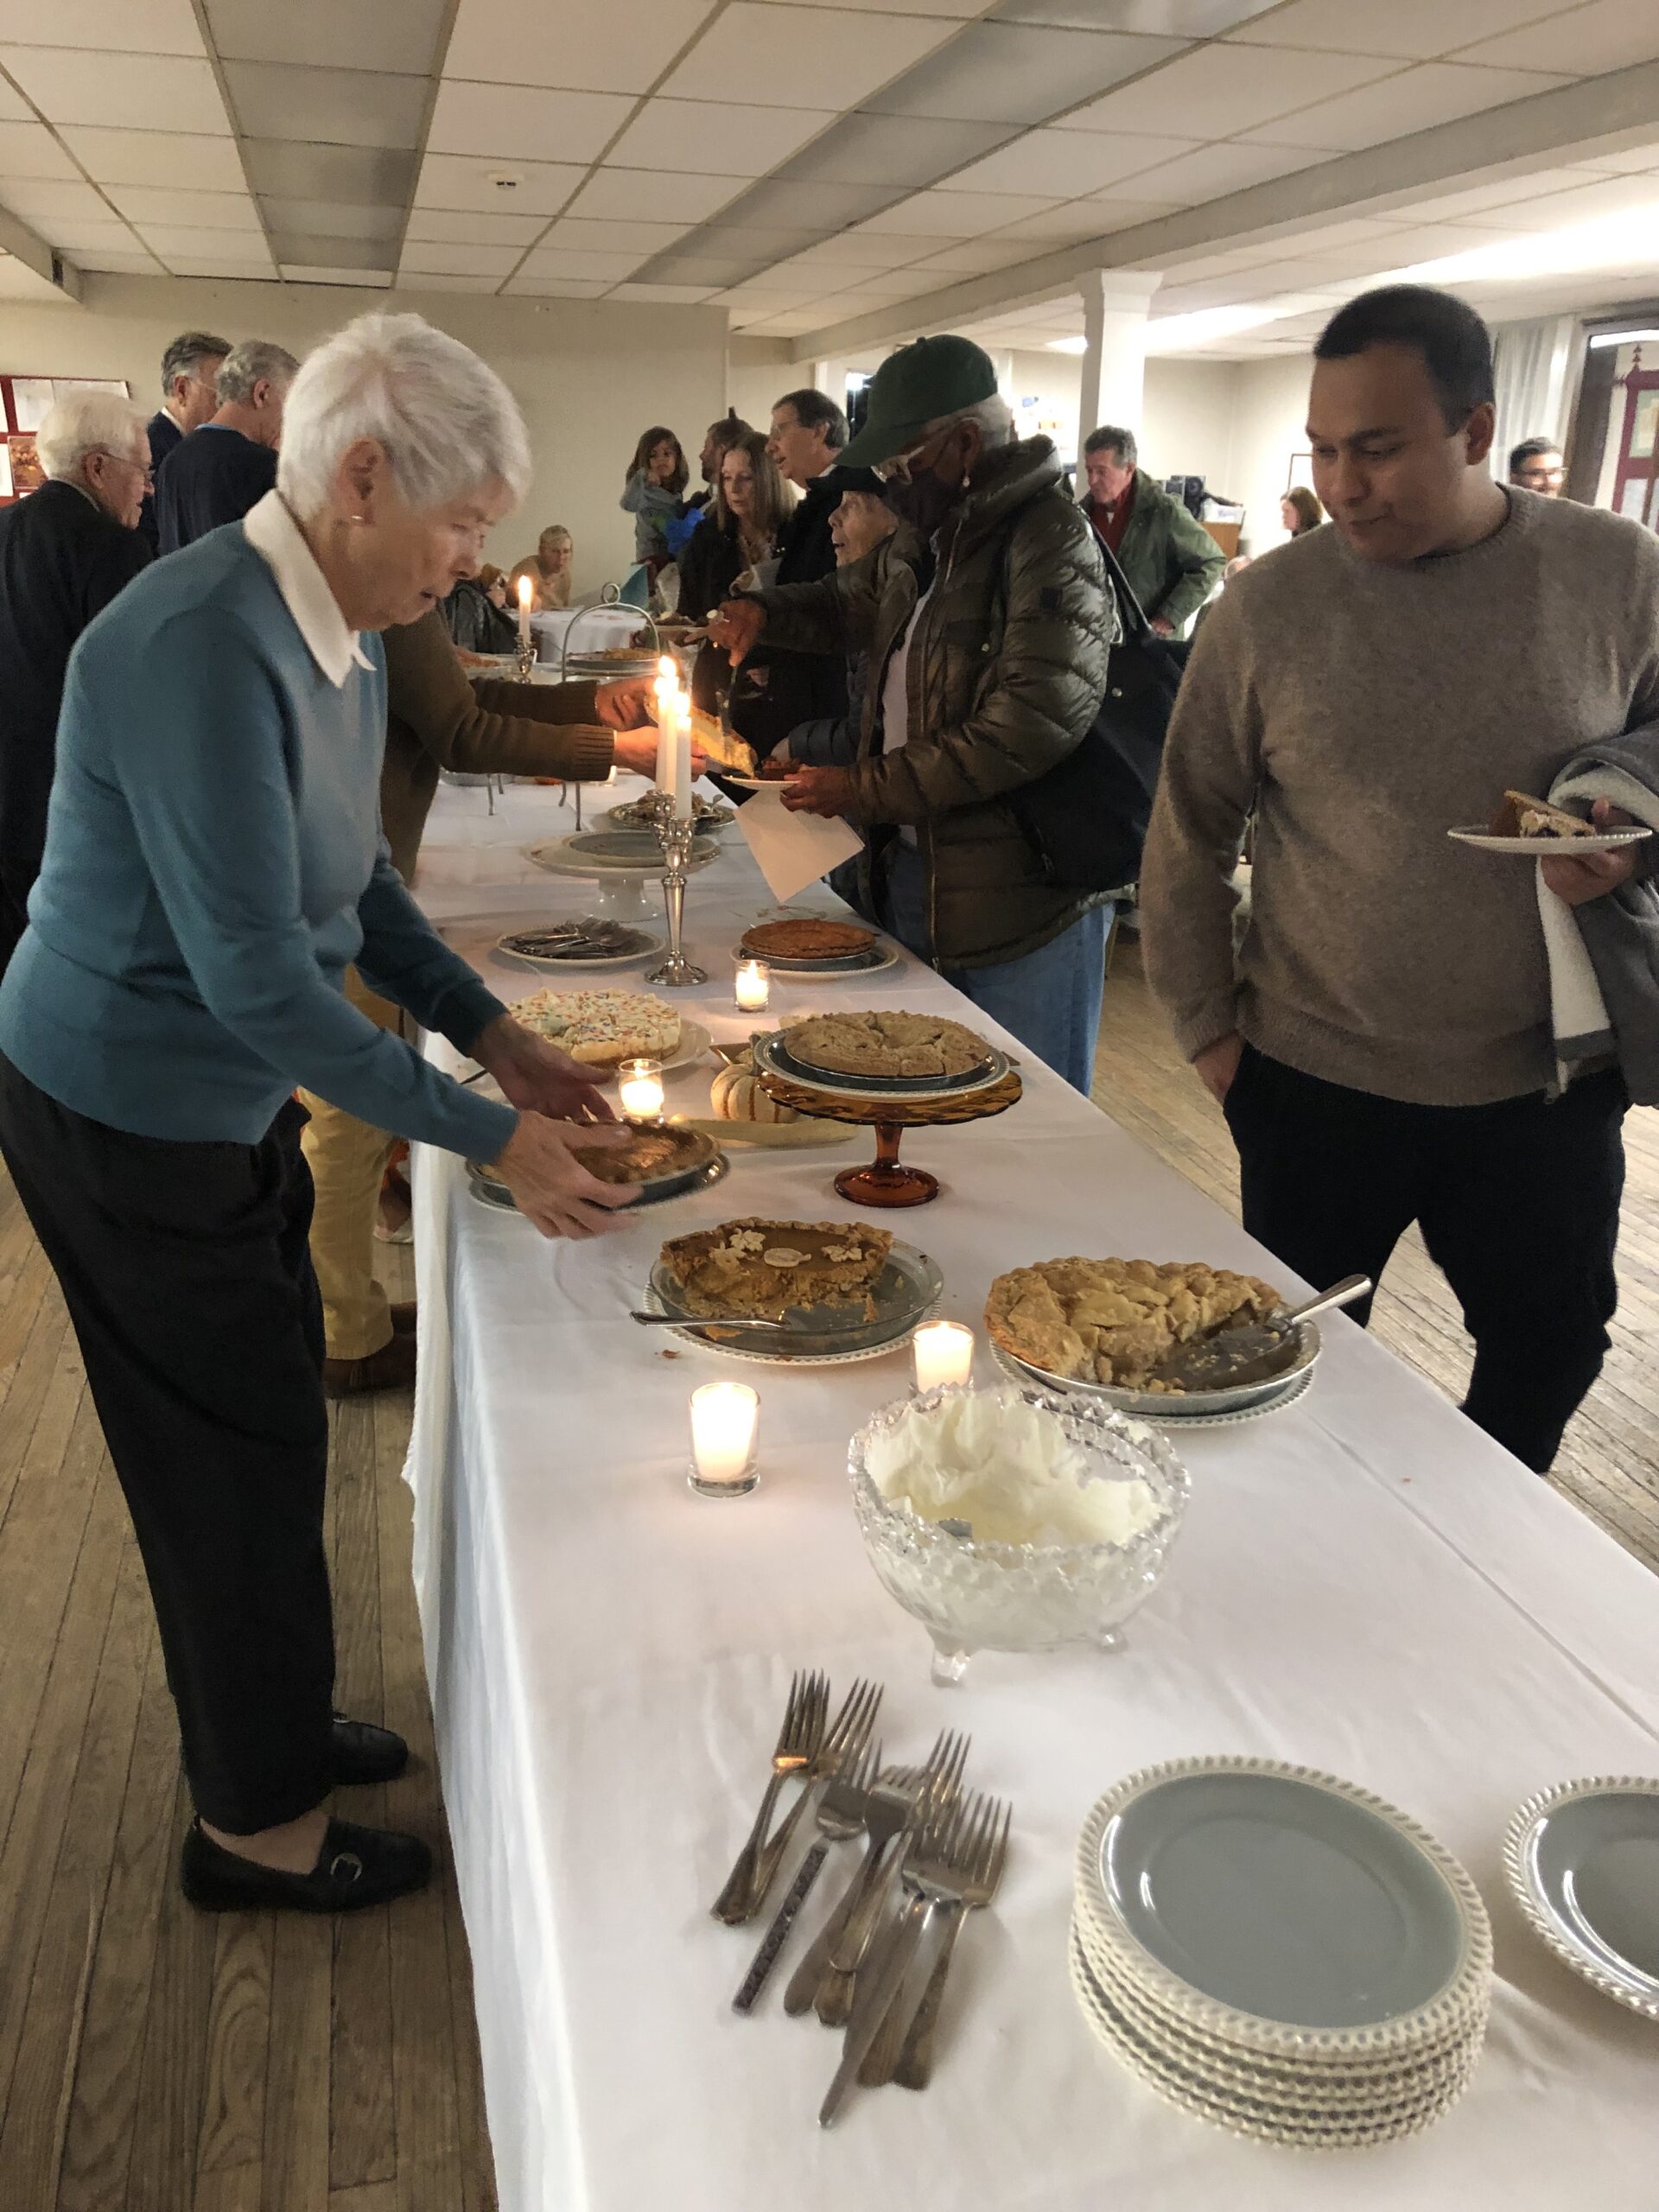 Congregants and faith leaders had pie and coffee after the interfaith service on Thursday night.